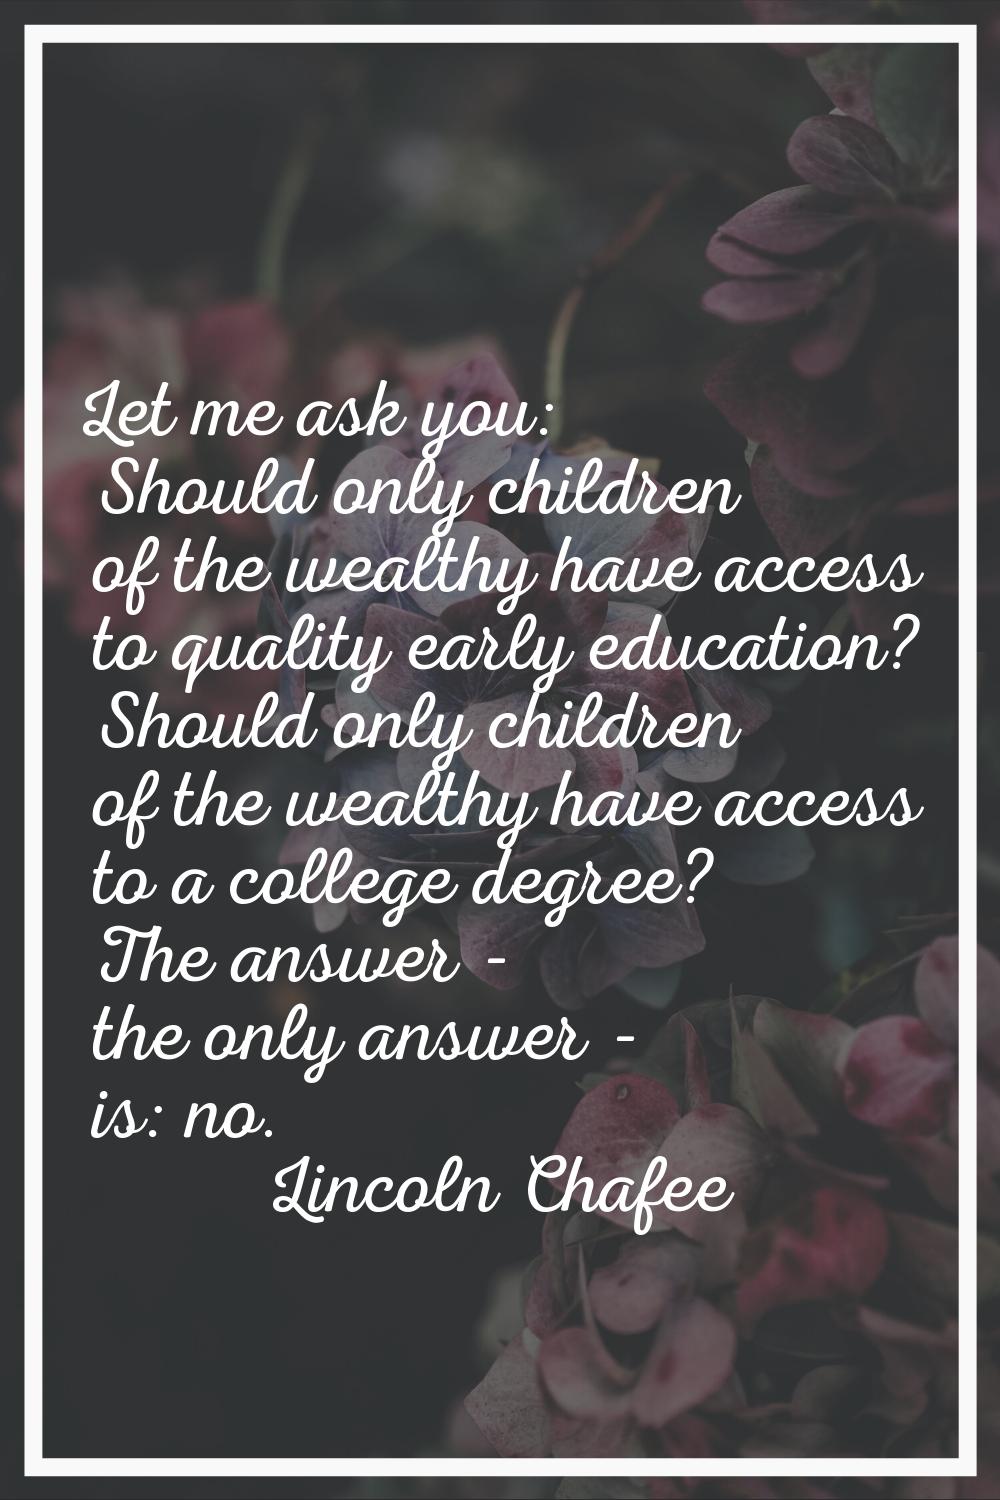 Let me ask you: Should only children of the wealthy have access to quality early education? Should 